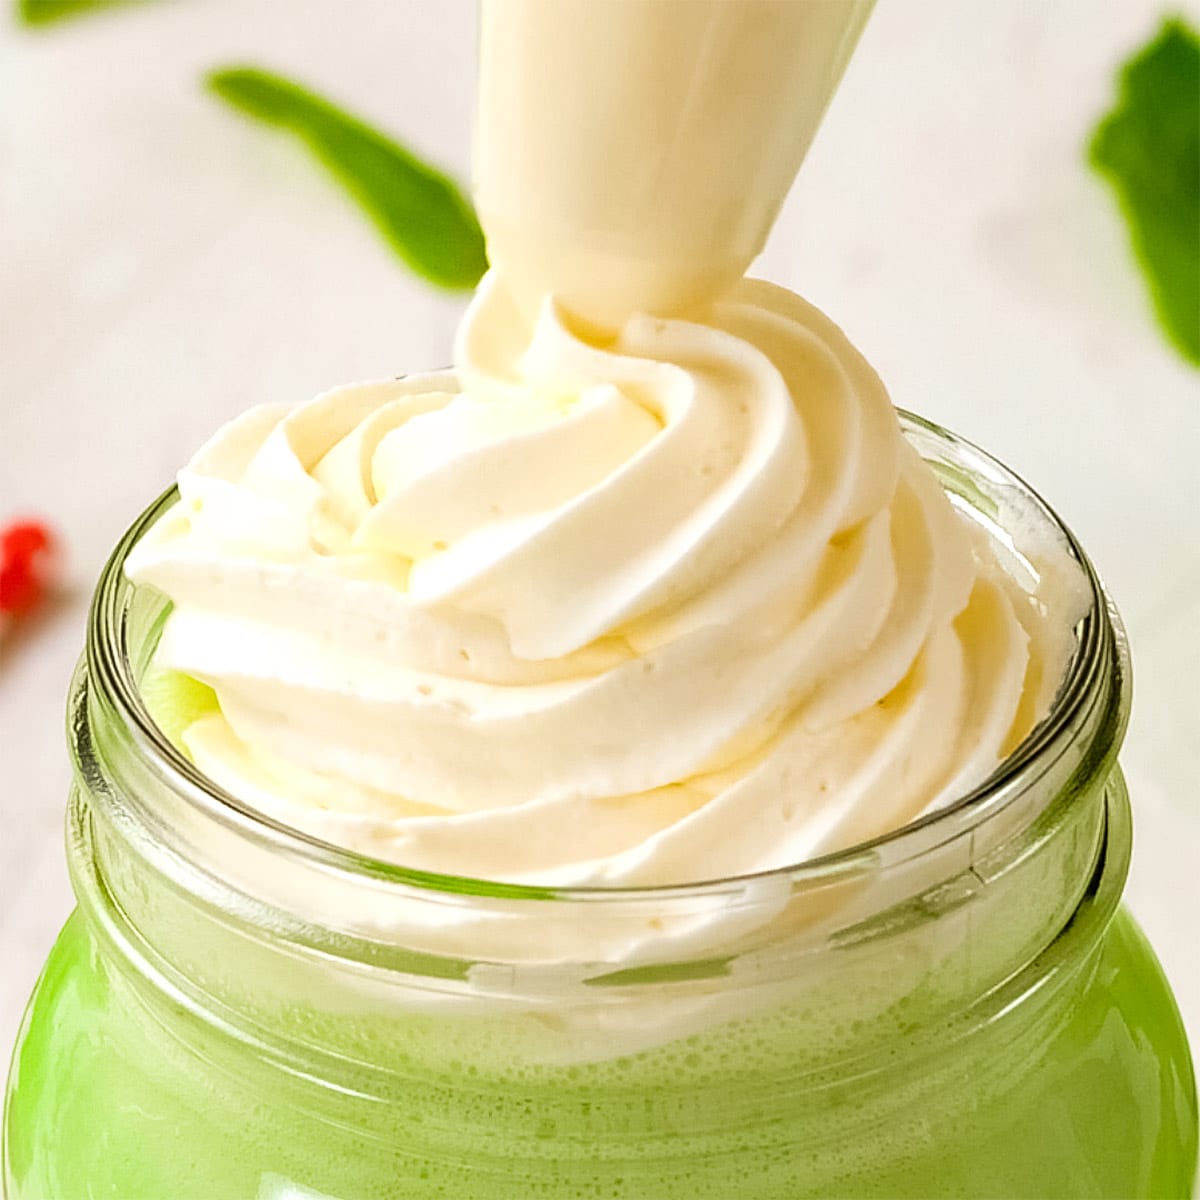 Keto whipped cream topping a smoothie.